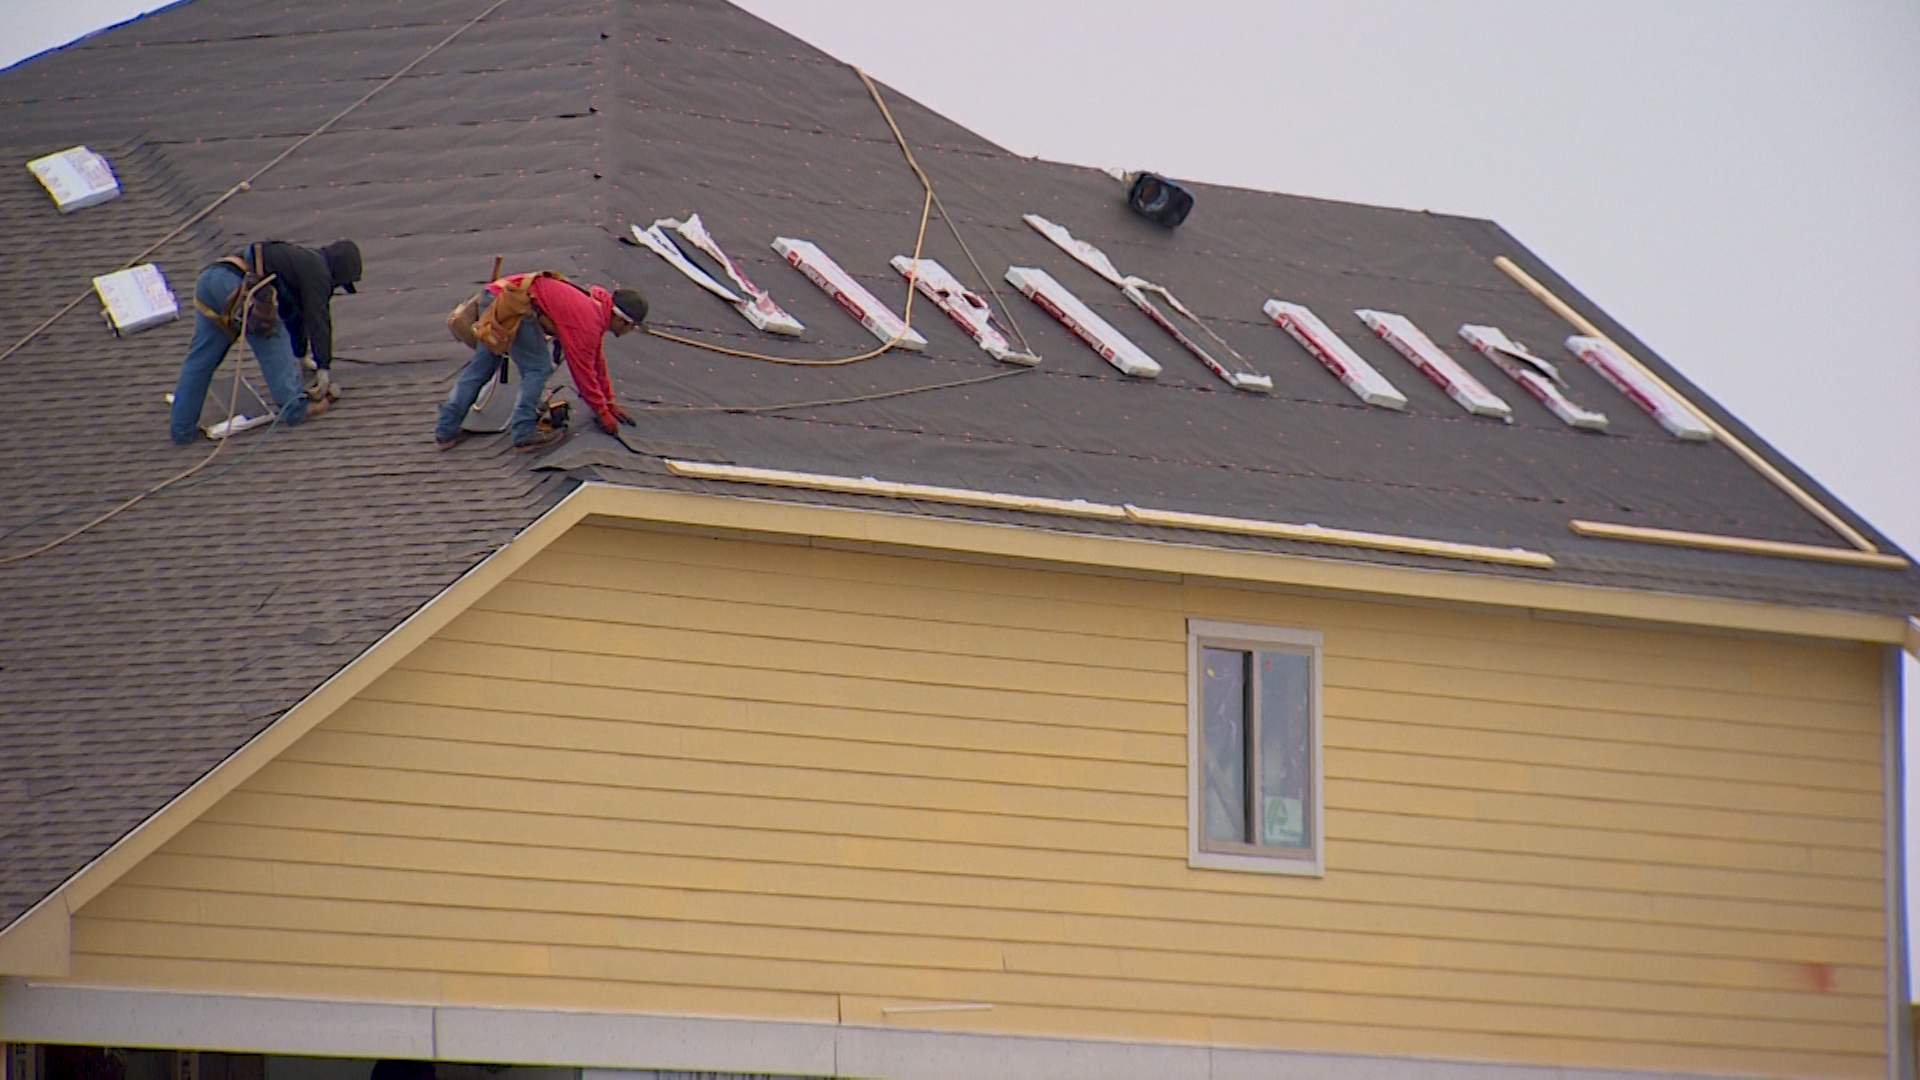 4 Good Reasons to Have a Roofing Contractor Roof Your Home in the Winter